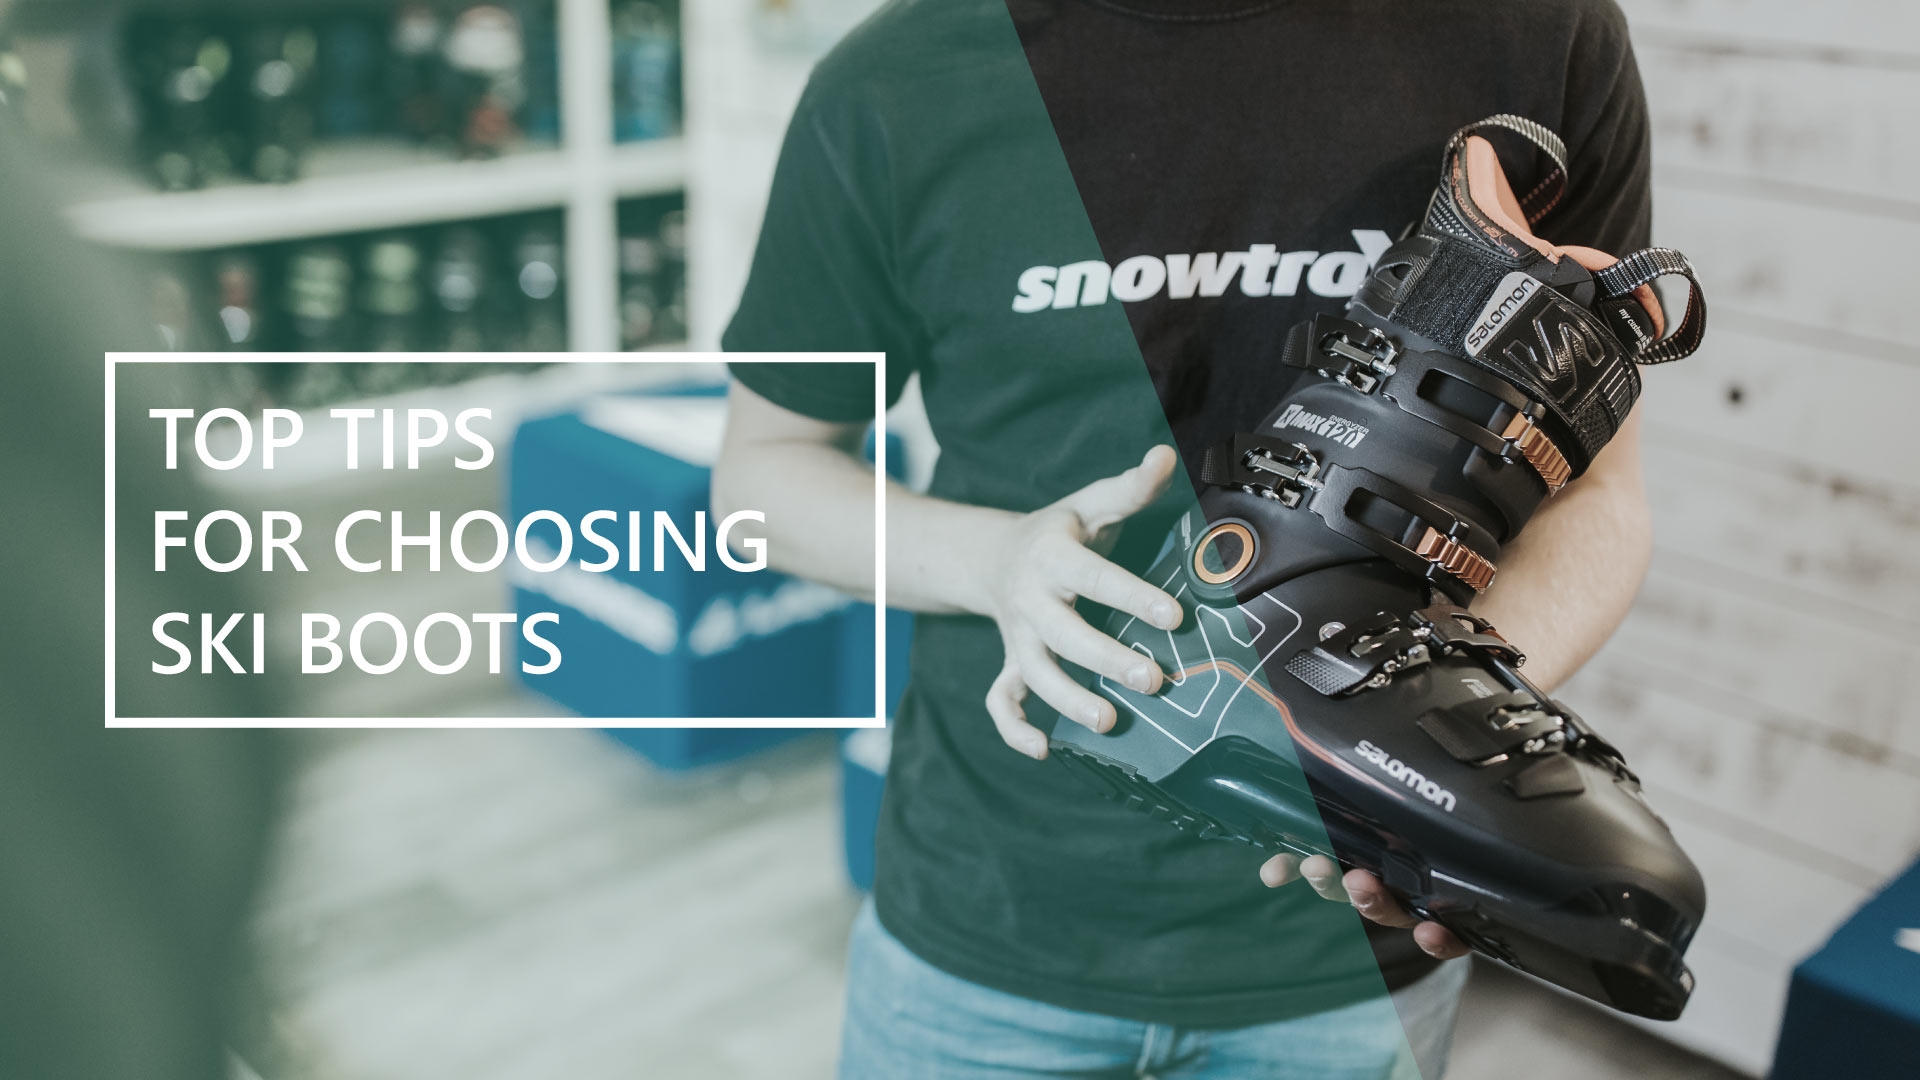 Top 5 Tips For Choosing Ski Boots